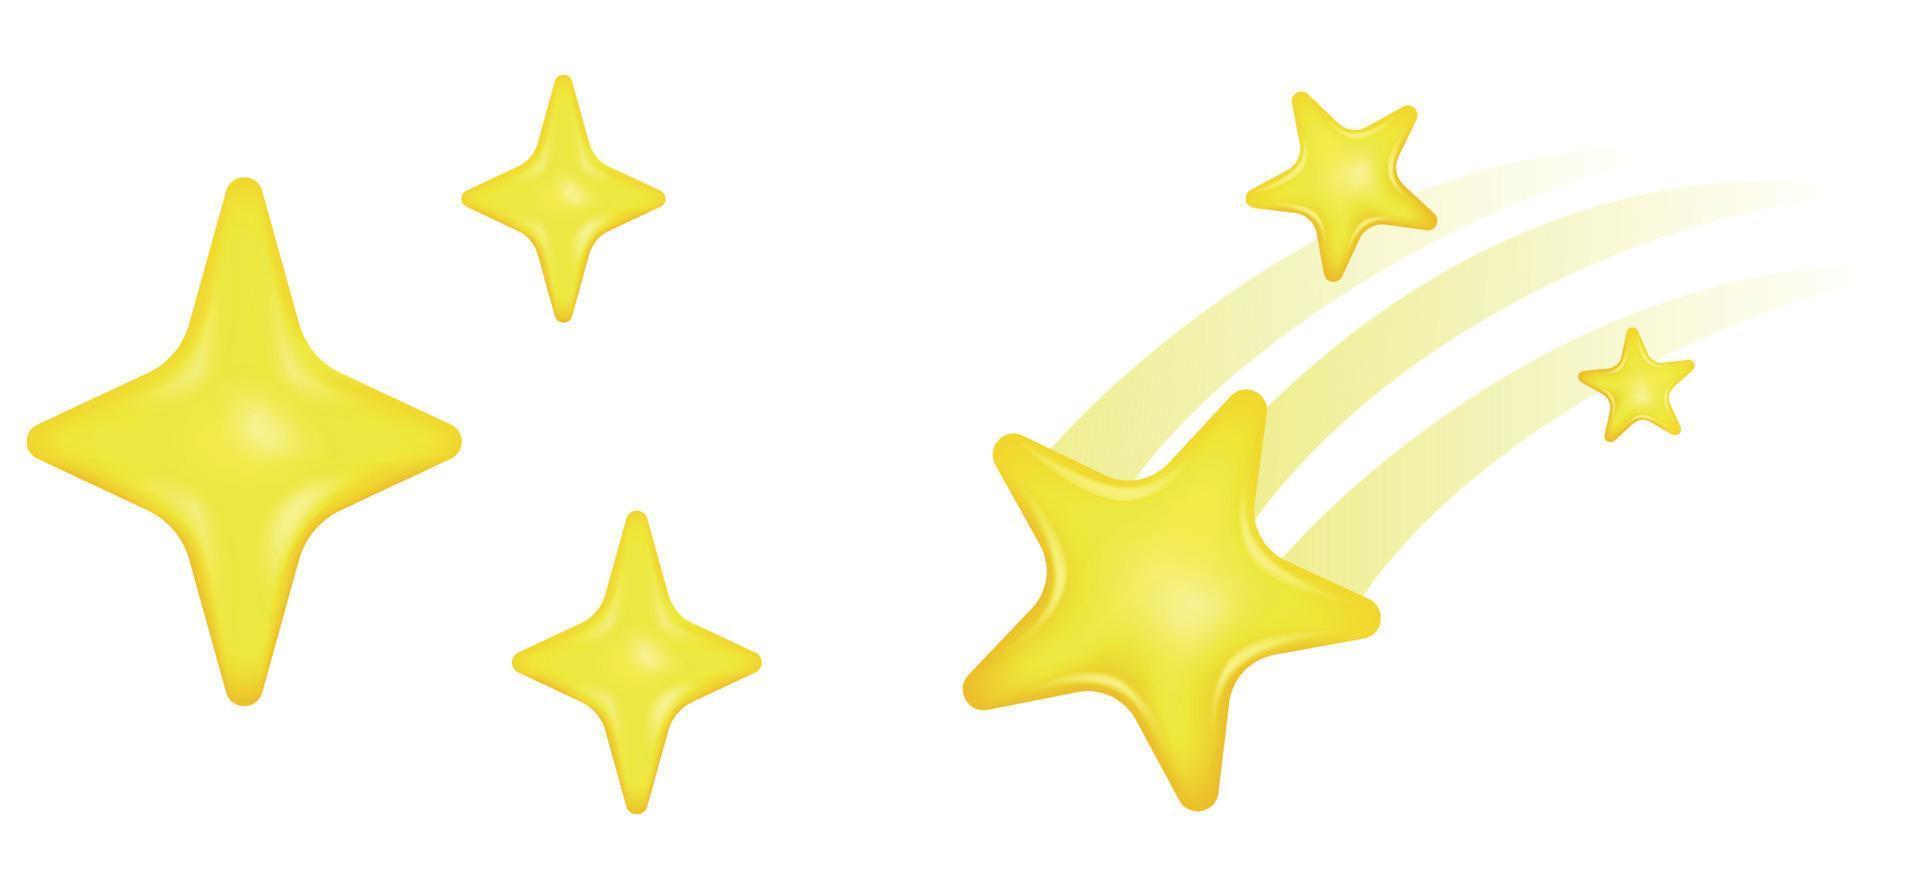 Shining and shooting stars emoji. Realistic star icon. Isolated vector